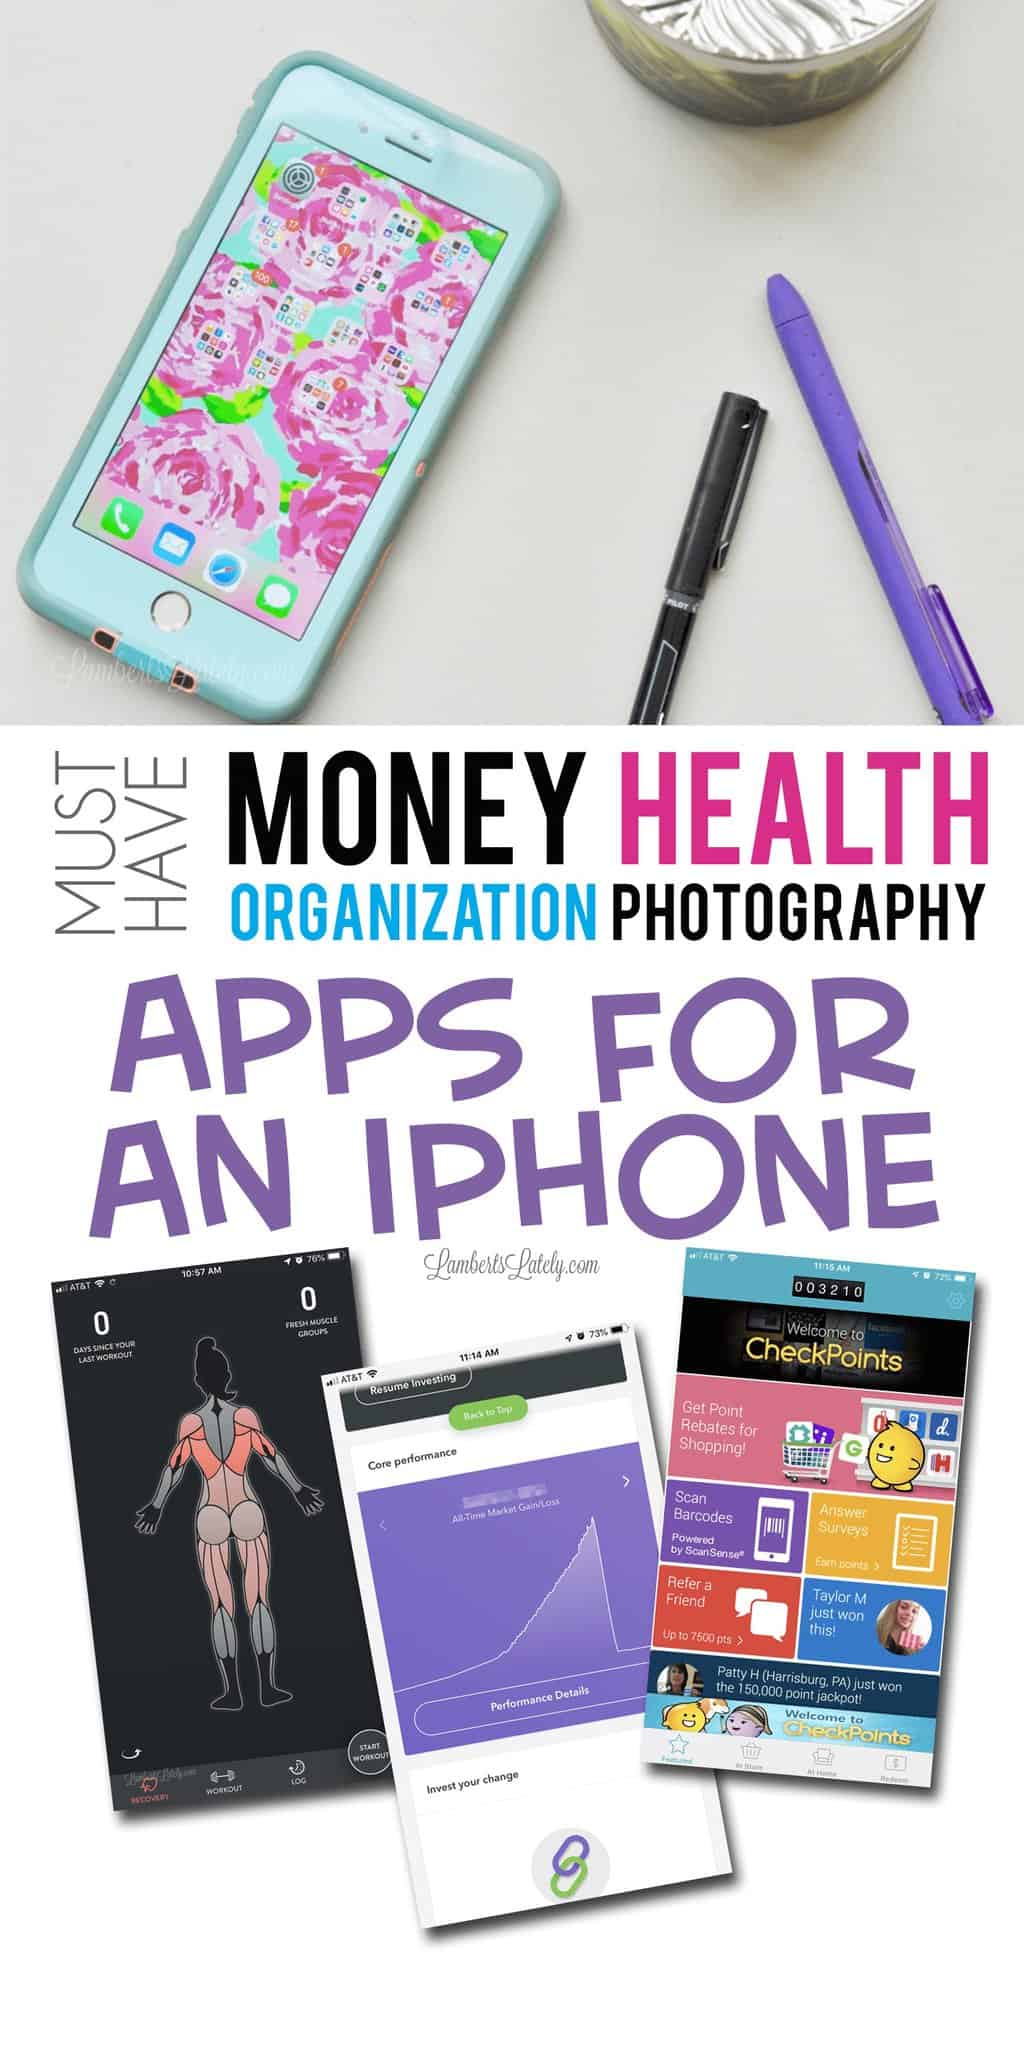 These are the must-have iPhone apps for organization, productivity, money management, health, and photography.  There are even apps that pay you! Find ideas and inspiration for how to organize your life with your smartphone.